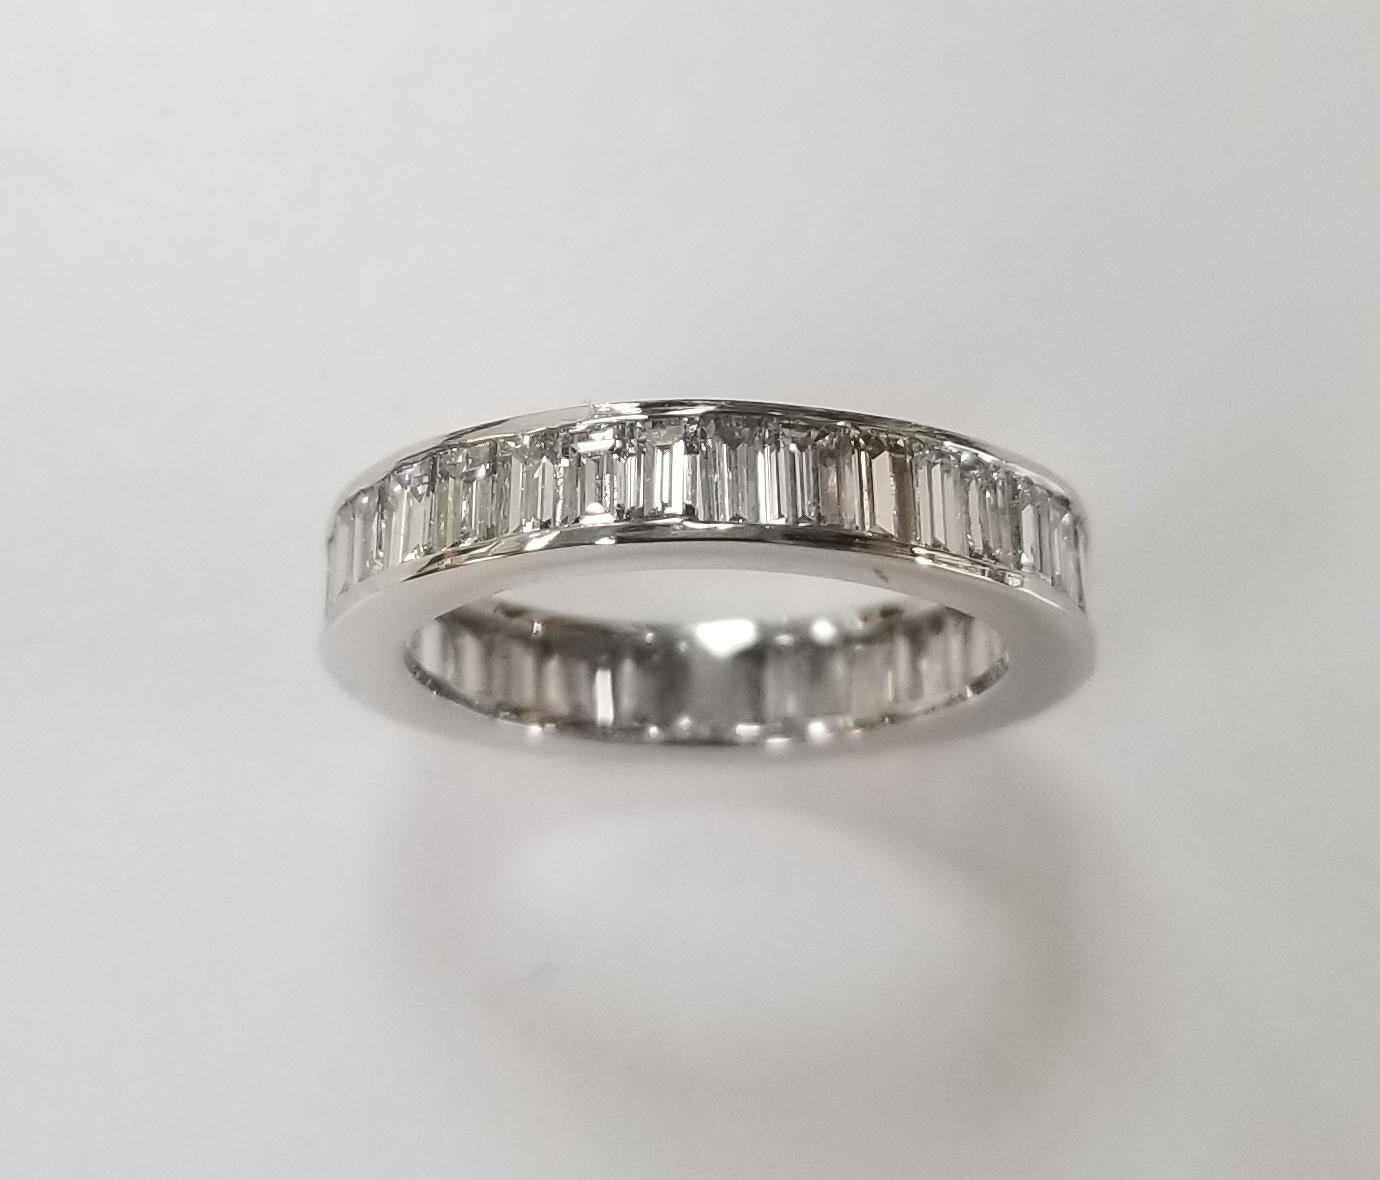 Contemporary 14 Karat White Gold Baguette Channel Eternity Ring with 3.25 Carat